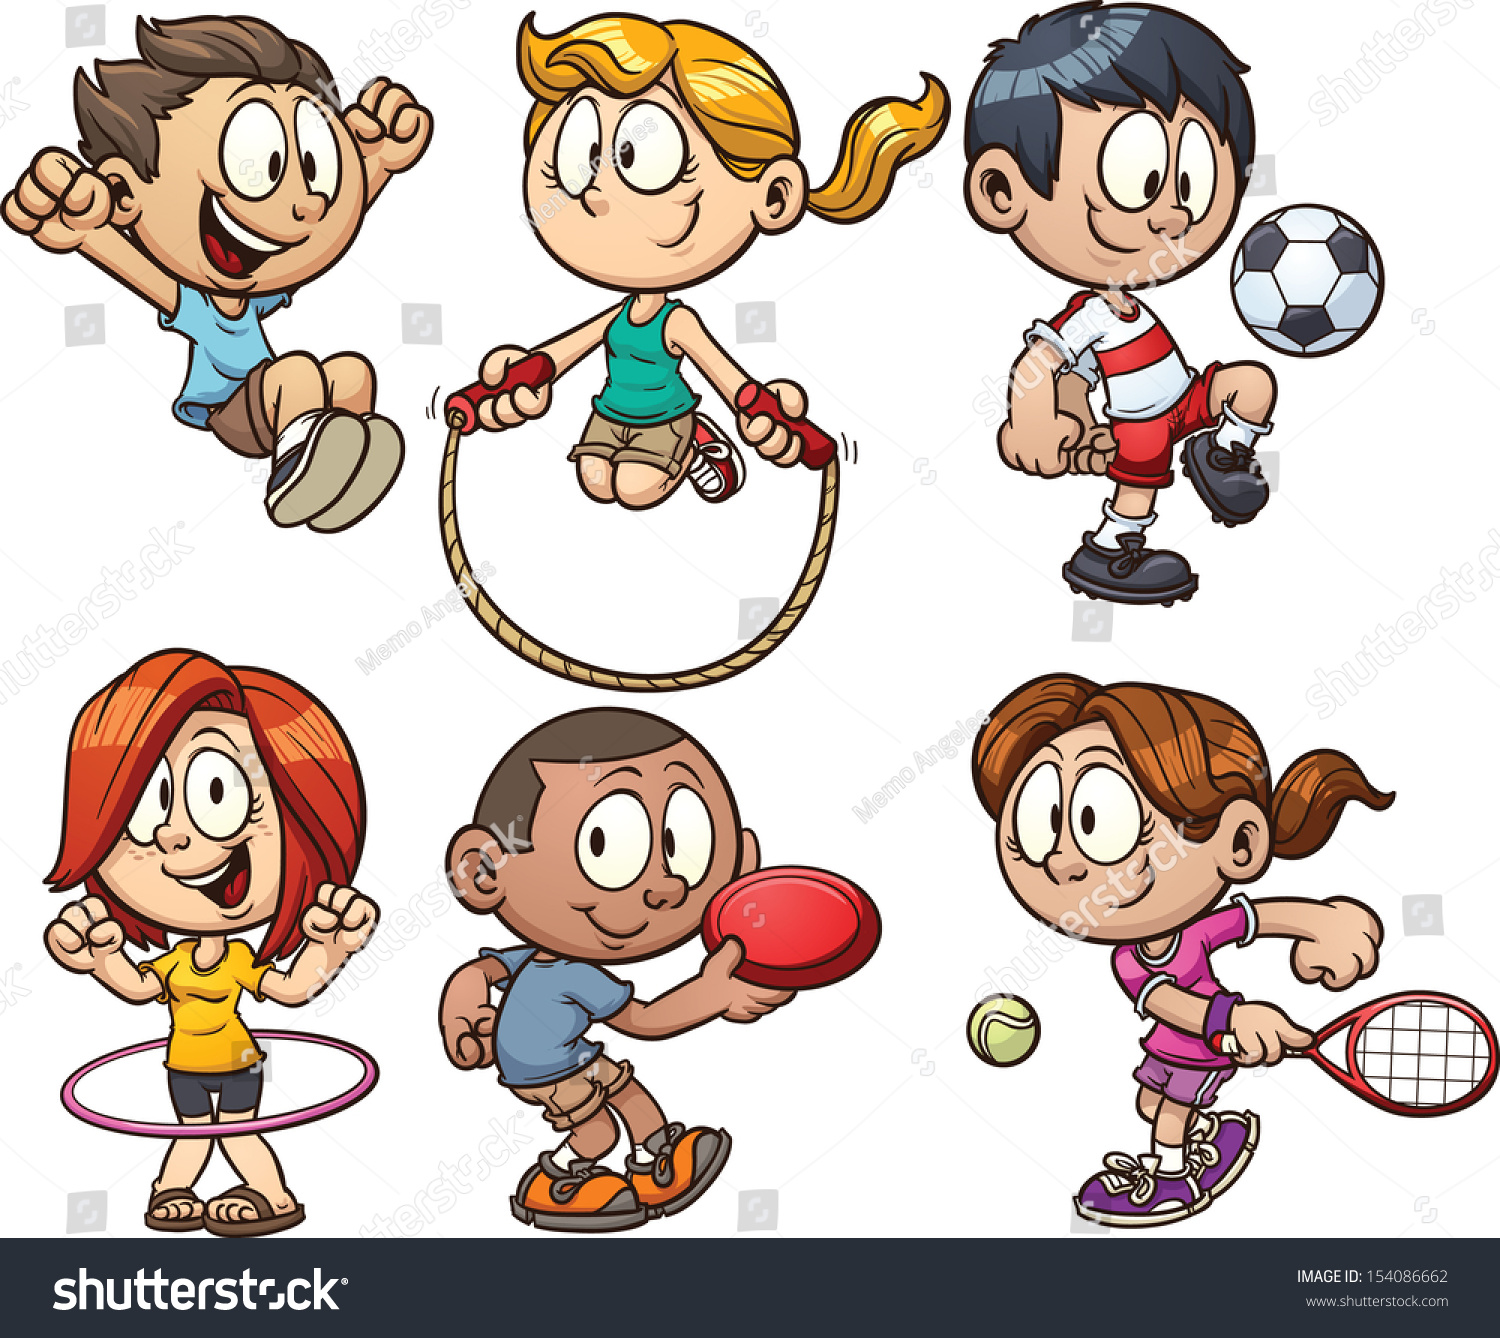 play together clipart - photo #45